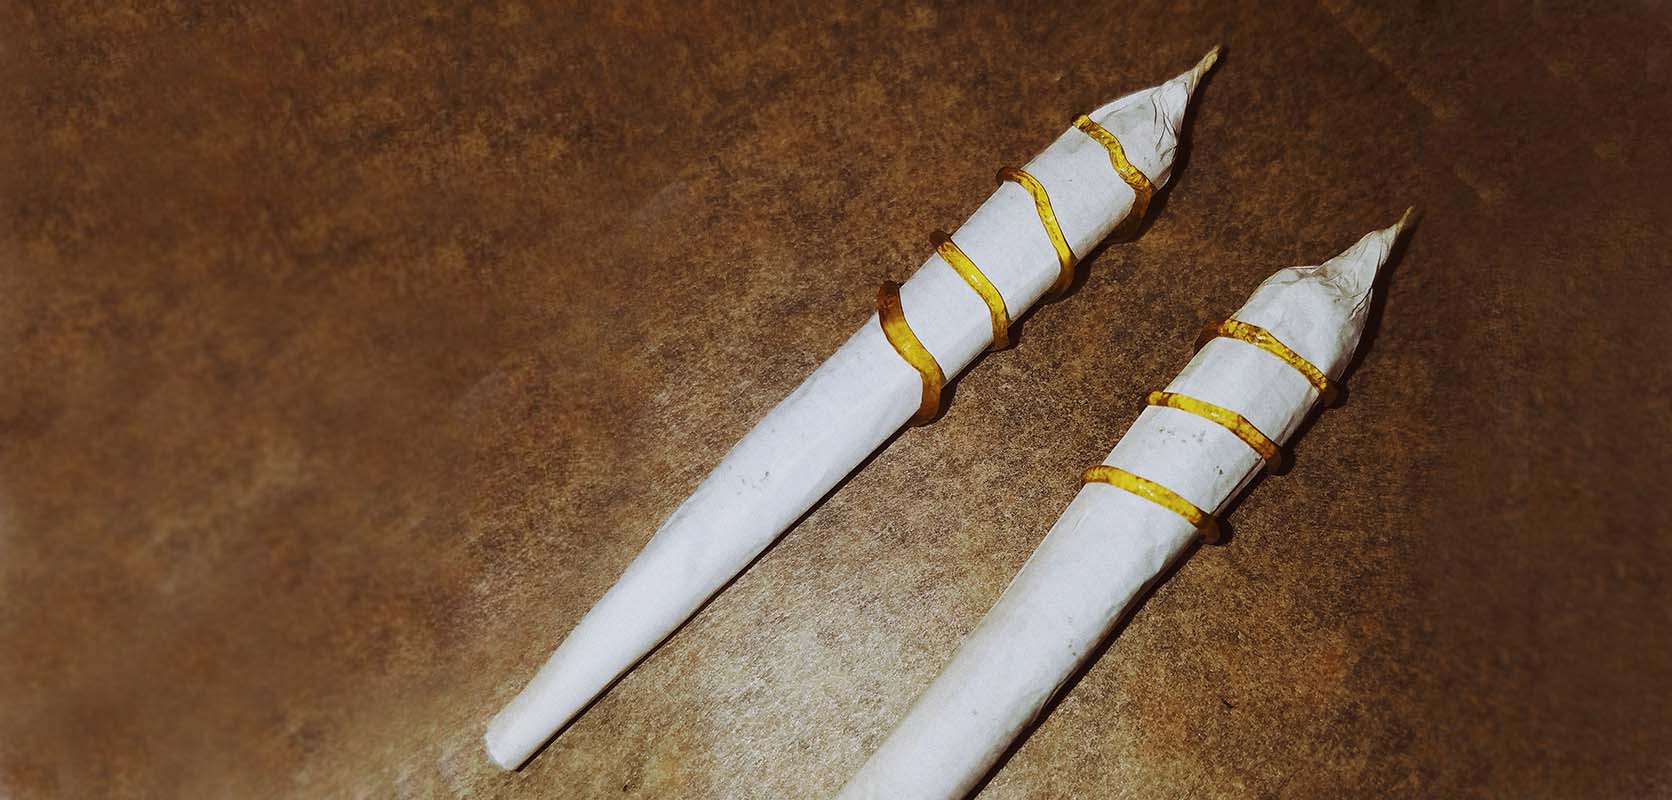 Pre-roll joints with shatter rings and shatter infused. Buy cannabis concentrates online in Canada from the best online dispensary.